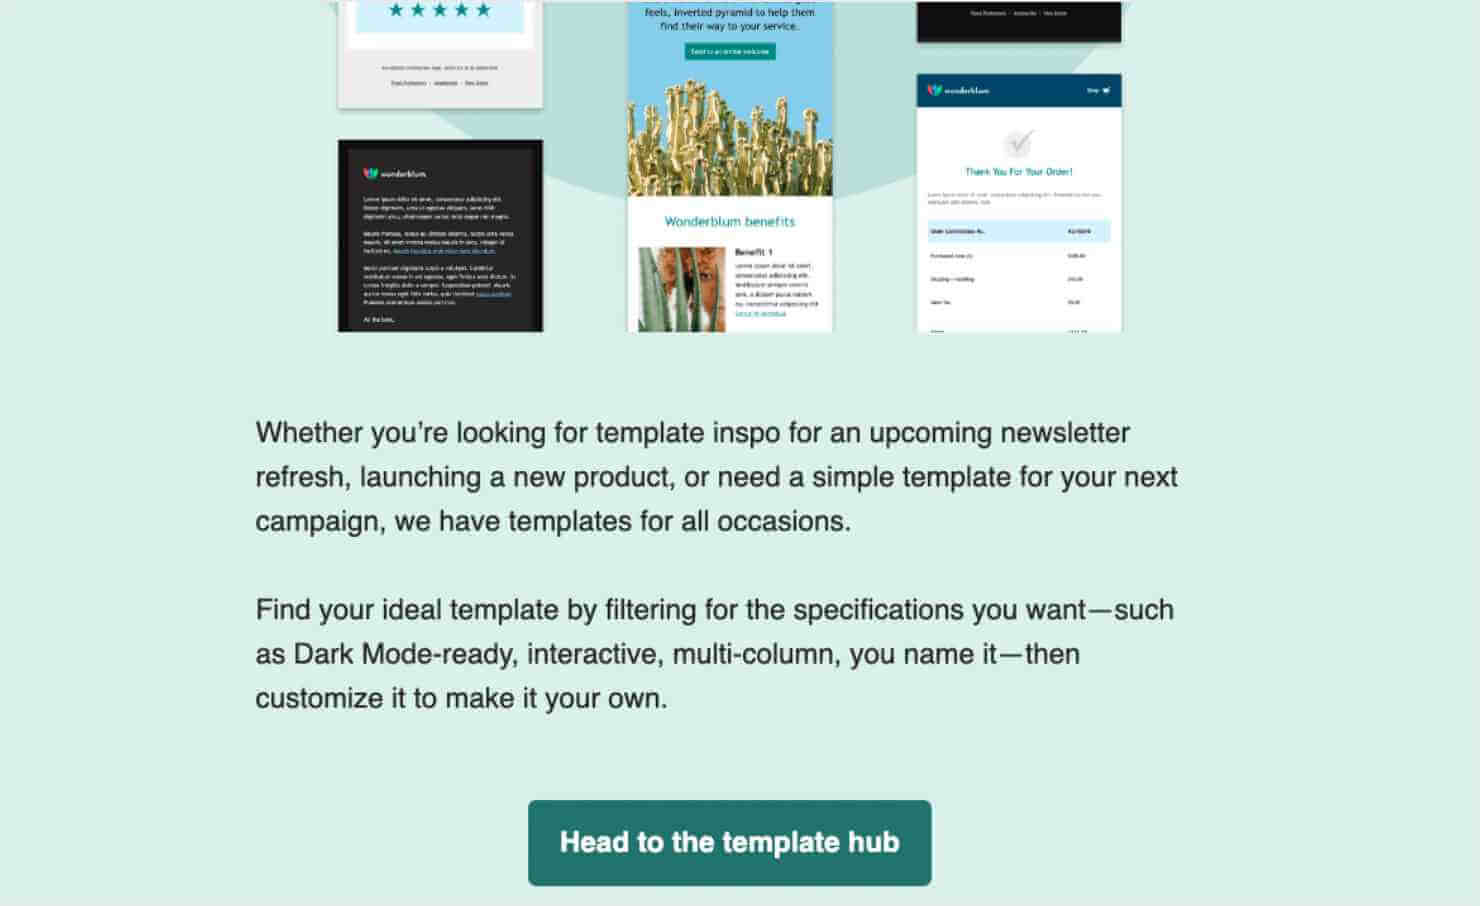 Images of email templates. "Whether you're looking for template inspo for an upcoming newsletter refresh, launching a new product, or need a simple template for your next campaign, we have templates for all occasions. Find your ideal template by filtering for the specifications you want -such as Dark Mode-ready, interactive, multi-column, you name it-then customize it to make it your own." Green CTA button says "Head to the template hub"